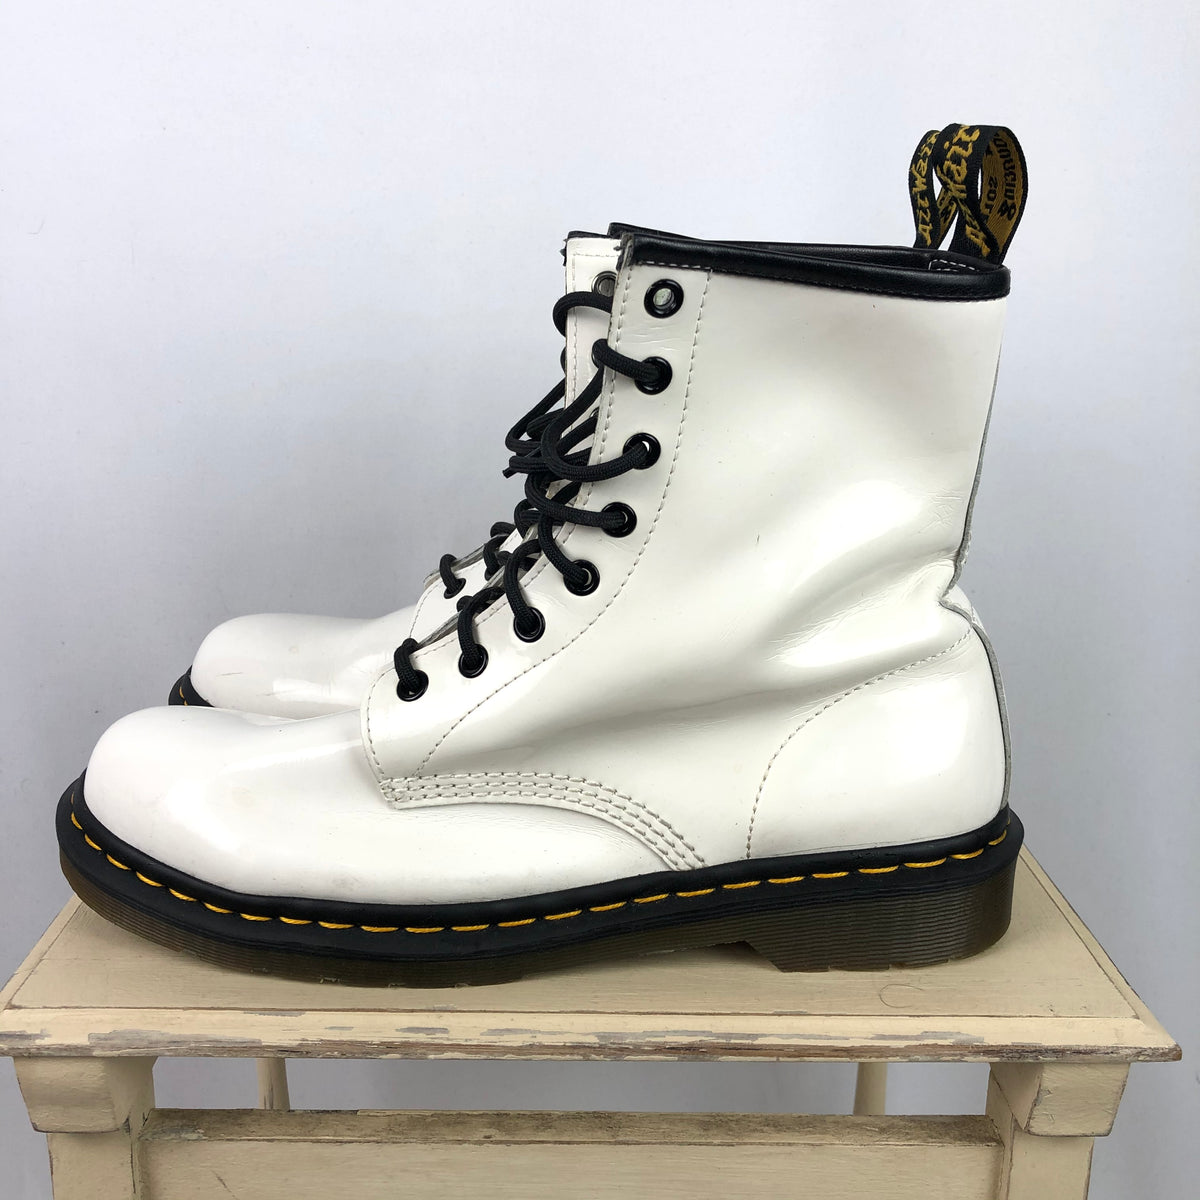 Dr Martens Patent 1460 Boots in White - UK9/EU43 - Vintique Clothing